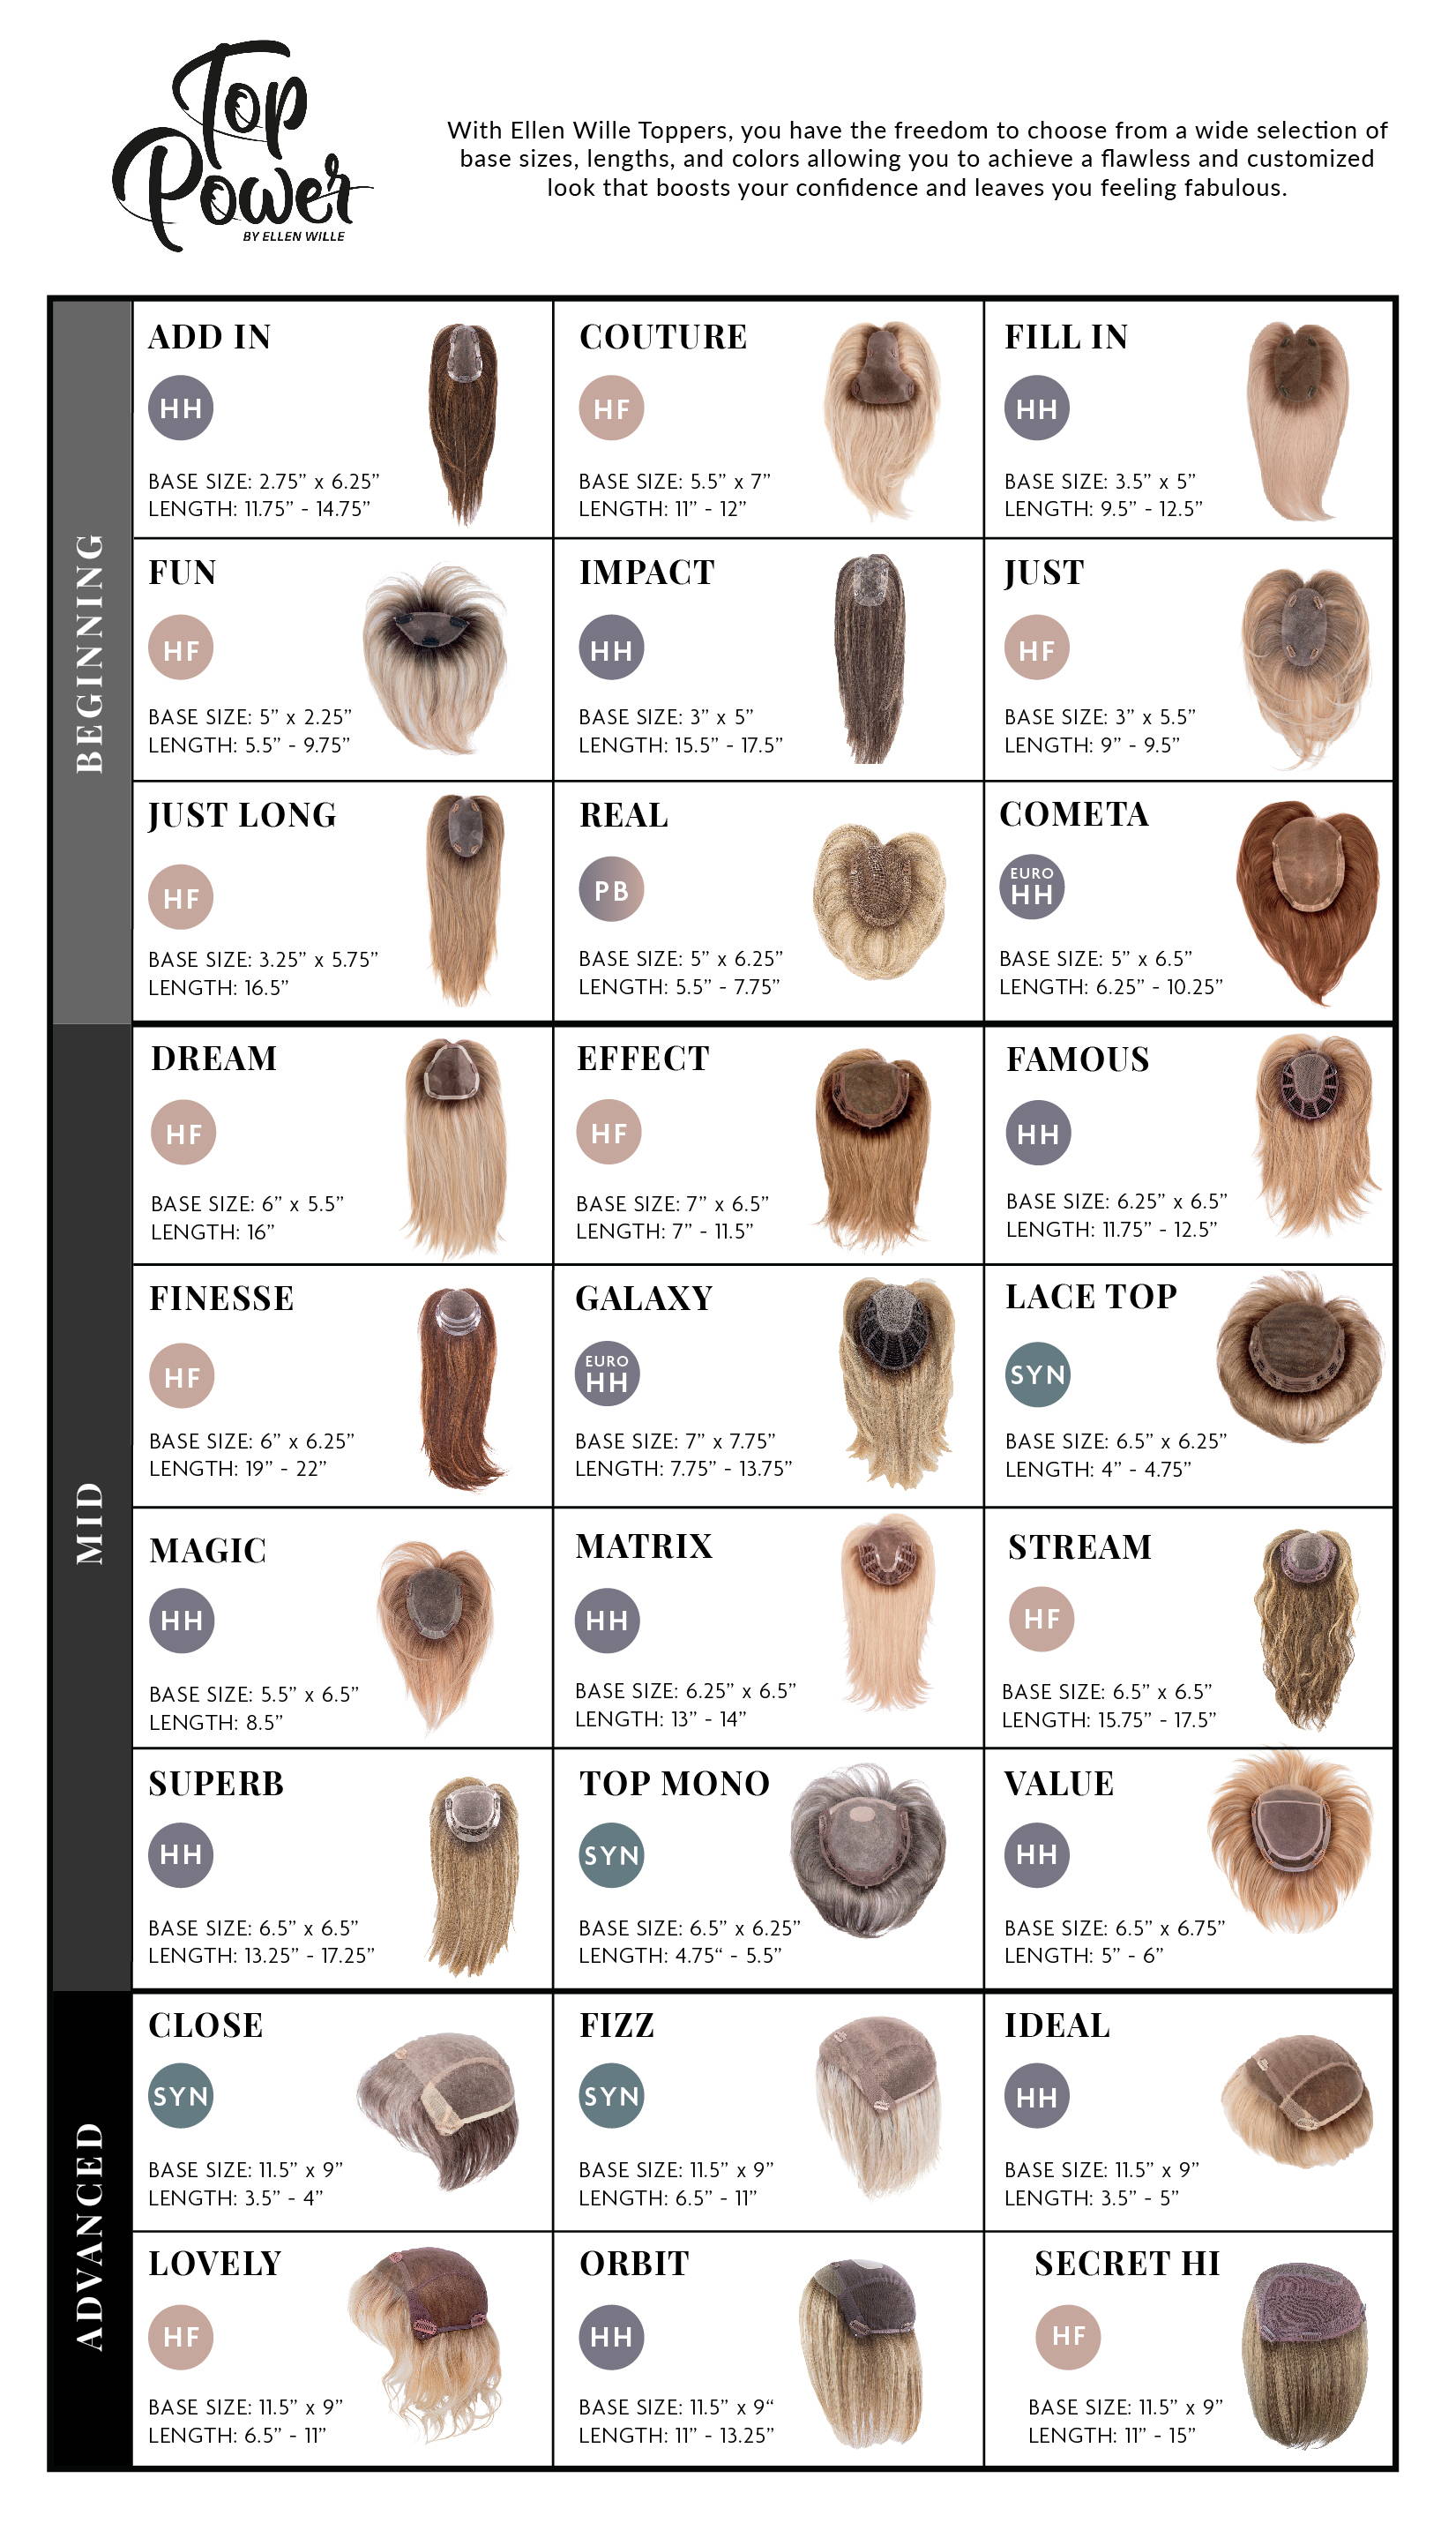 A chart of hair toppers in the Top Power collection by Ellen Wille.